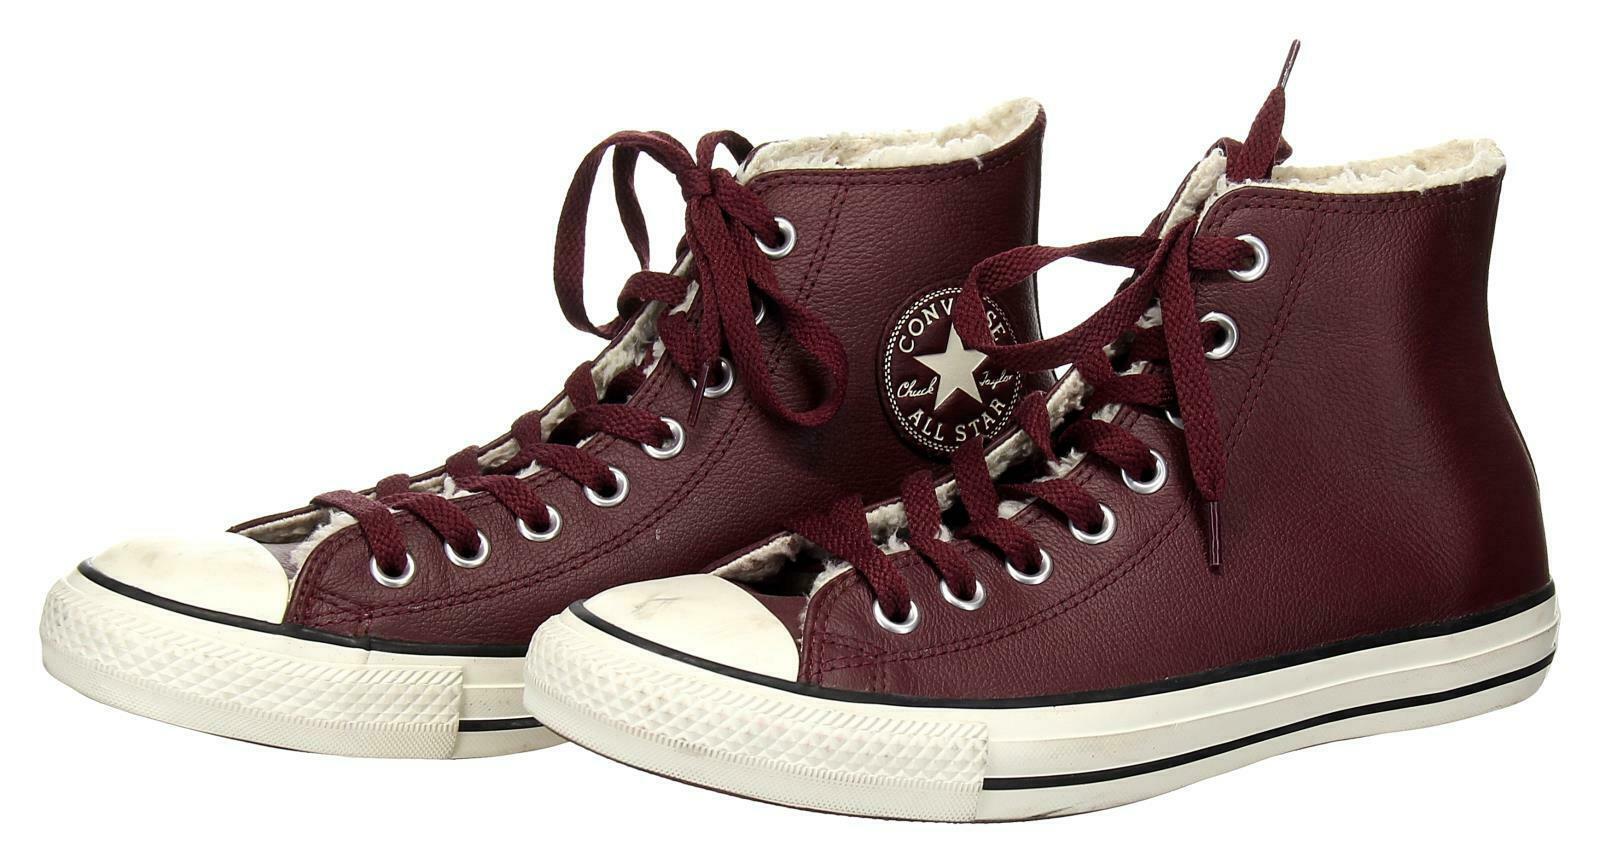 leather converse fur lined